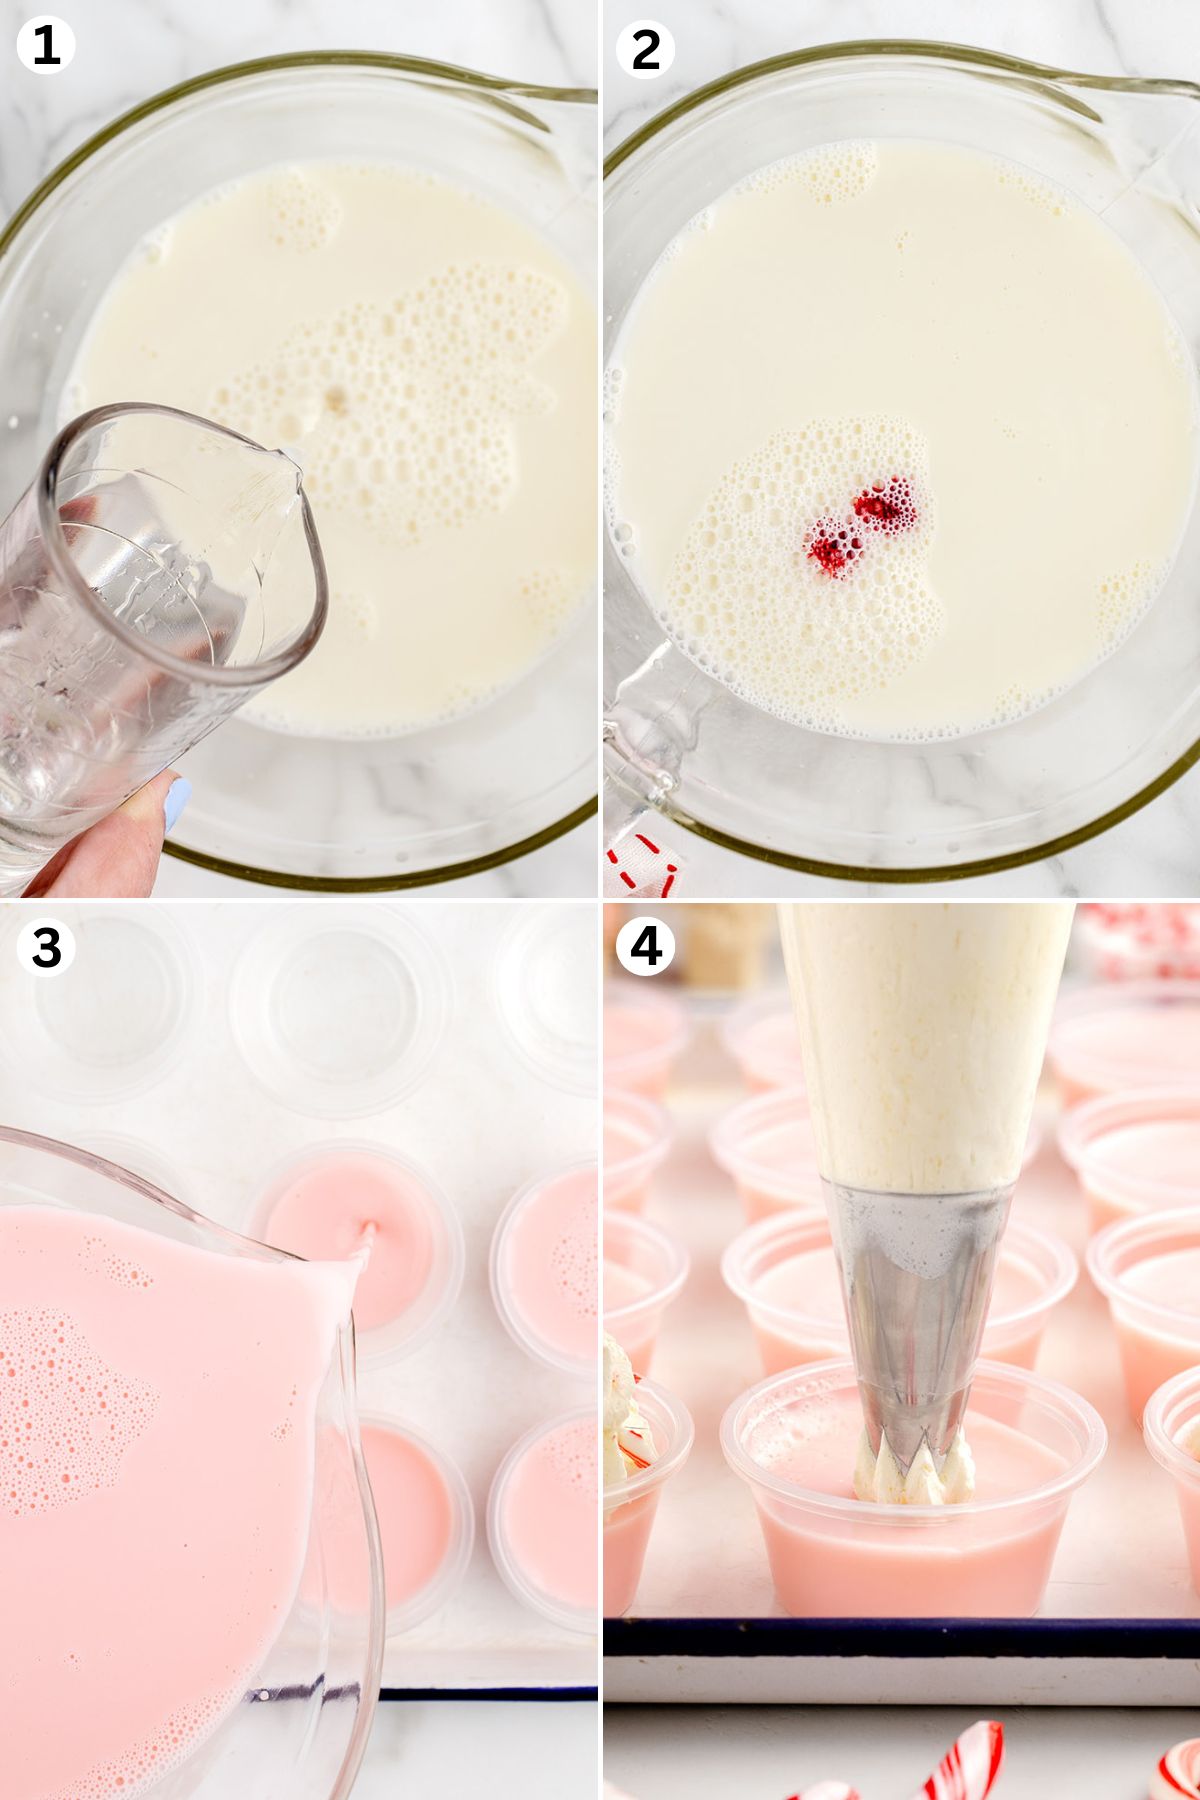 Whisk in the peppermint schnapps and red food coloring into the jello mixture. pour the jello shots into small plastic cups. squirt whipped cream into each cup.